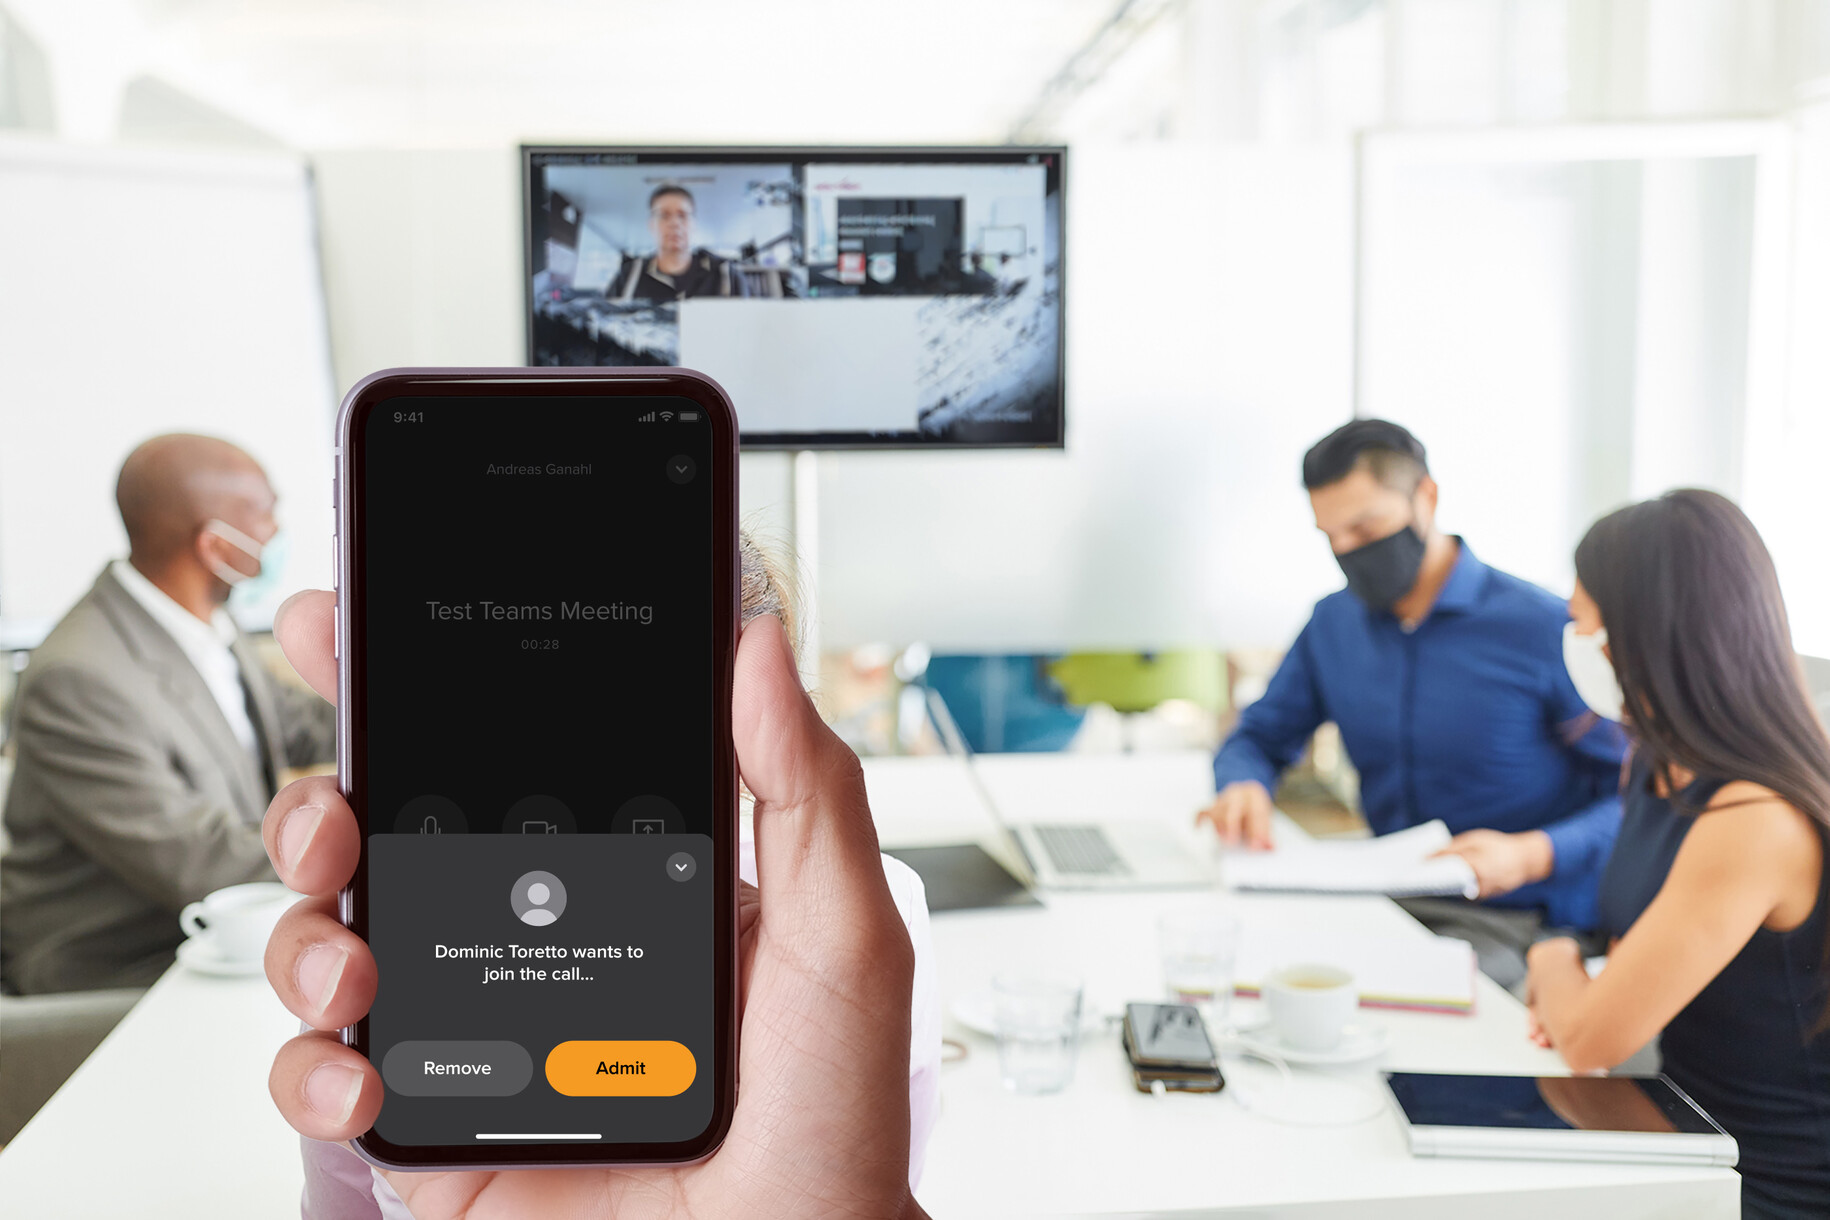 Zoom or Microsoft Teams meetings using WolfVision's vSolution App as a 'touchless' controller